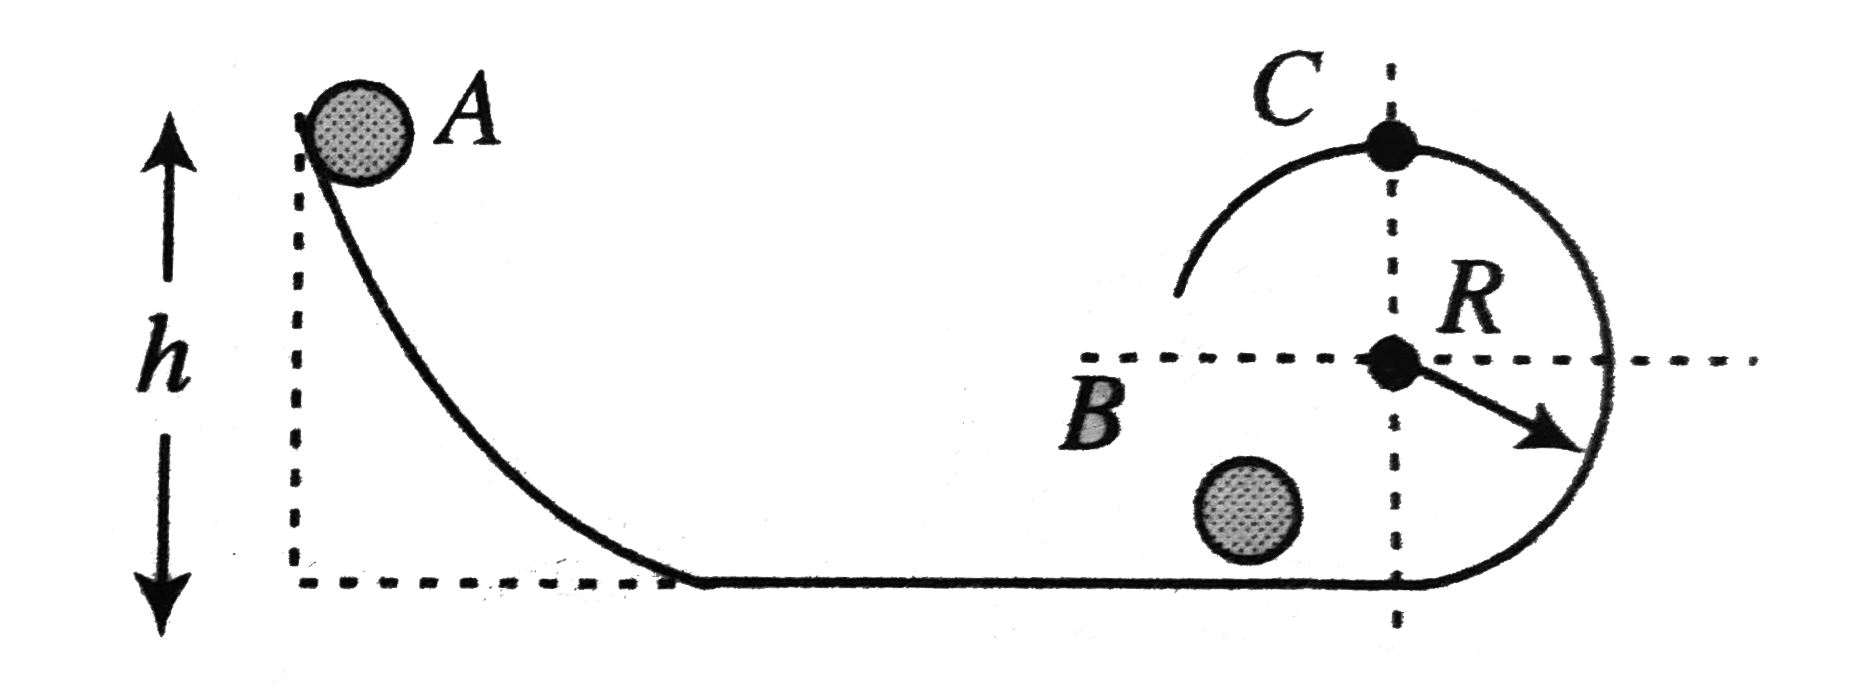 Ball A of mass m, after sliding from an inclined plane, strikes elastically another ball B of same mass at rest. Find the minimum heihgt h so that ball B just completes the circular motion of the surface at C. (All surfaces are smooth).